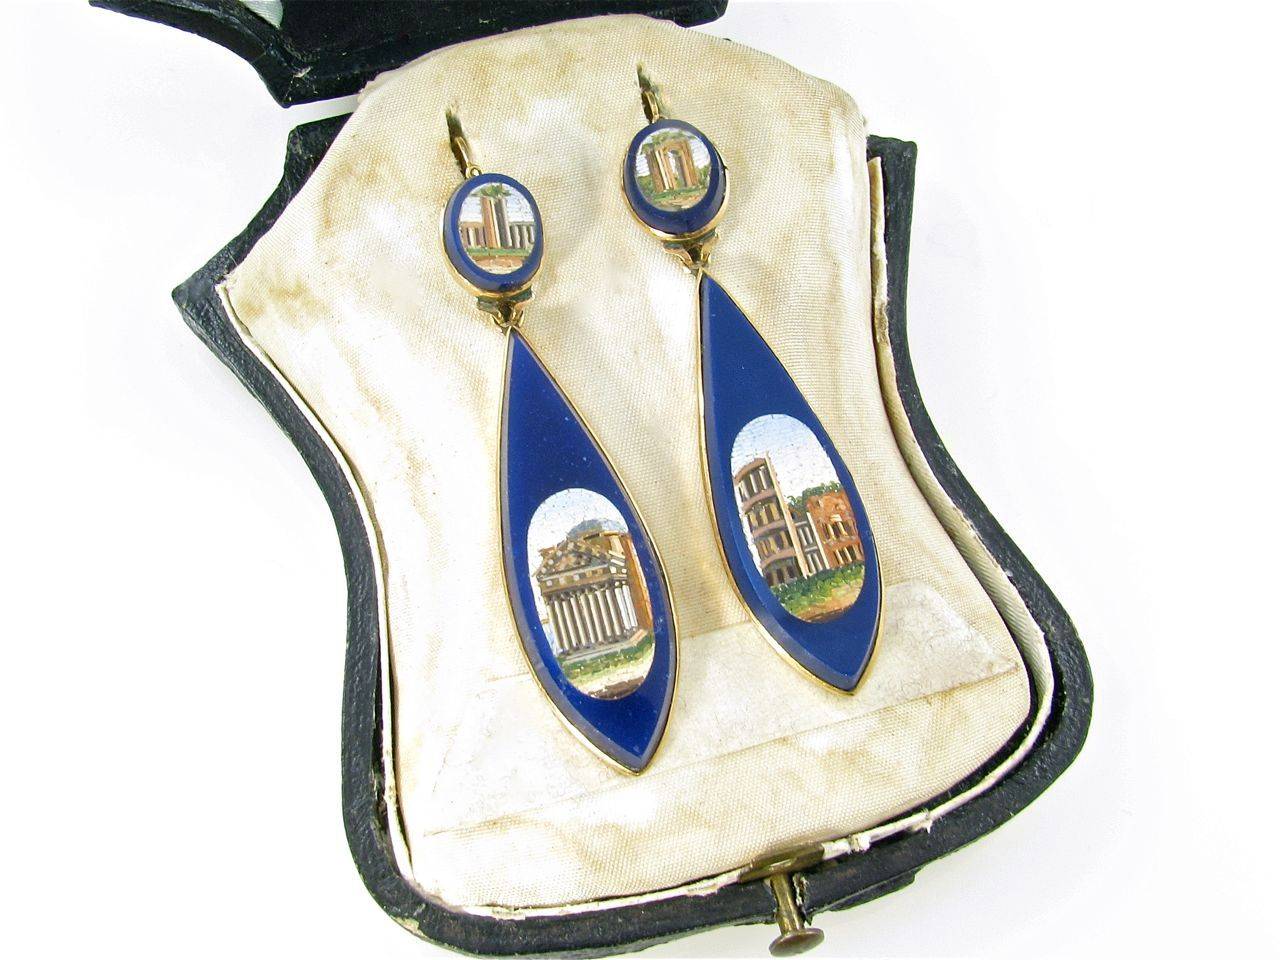 A pair of antique micromosaic and lapis lazuli, and 18 karat yellow gold earrings, Vatican school, 19th Century.  The earrings are designed as oval micromosaic tops depicting the Arch of Constantine and the Imperial Forum, suspending teardrop shaped